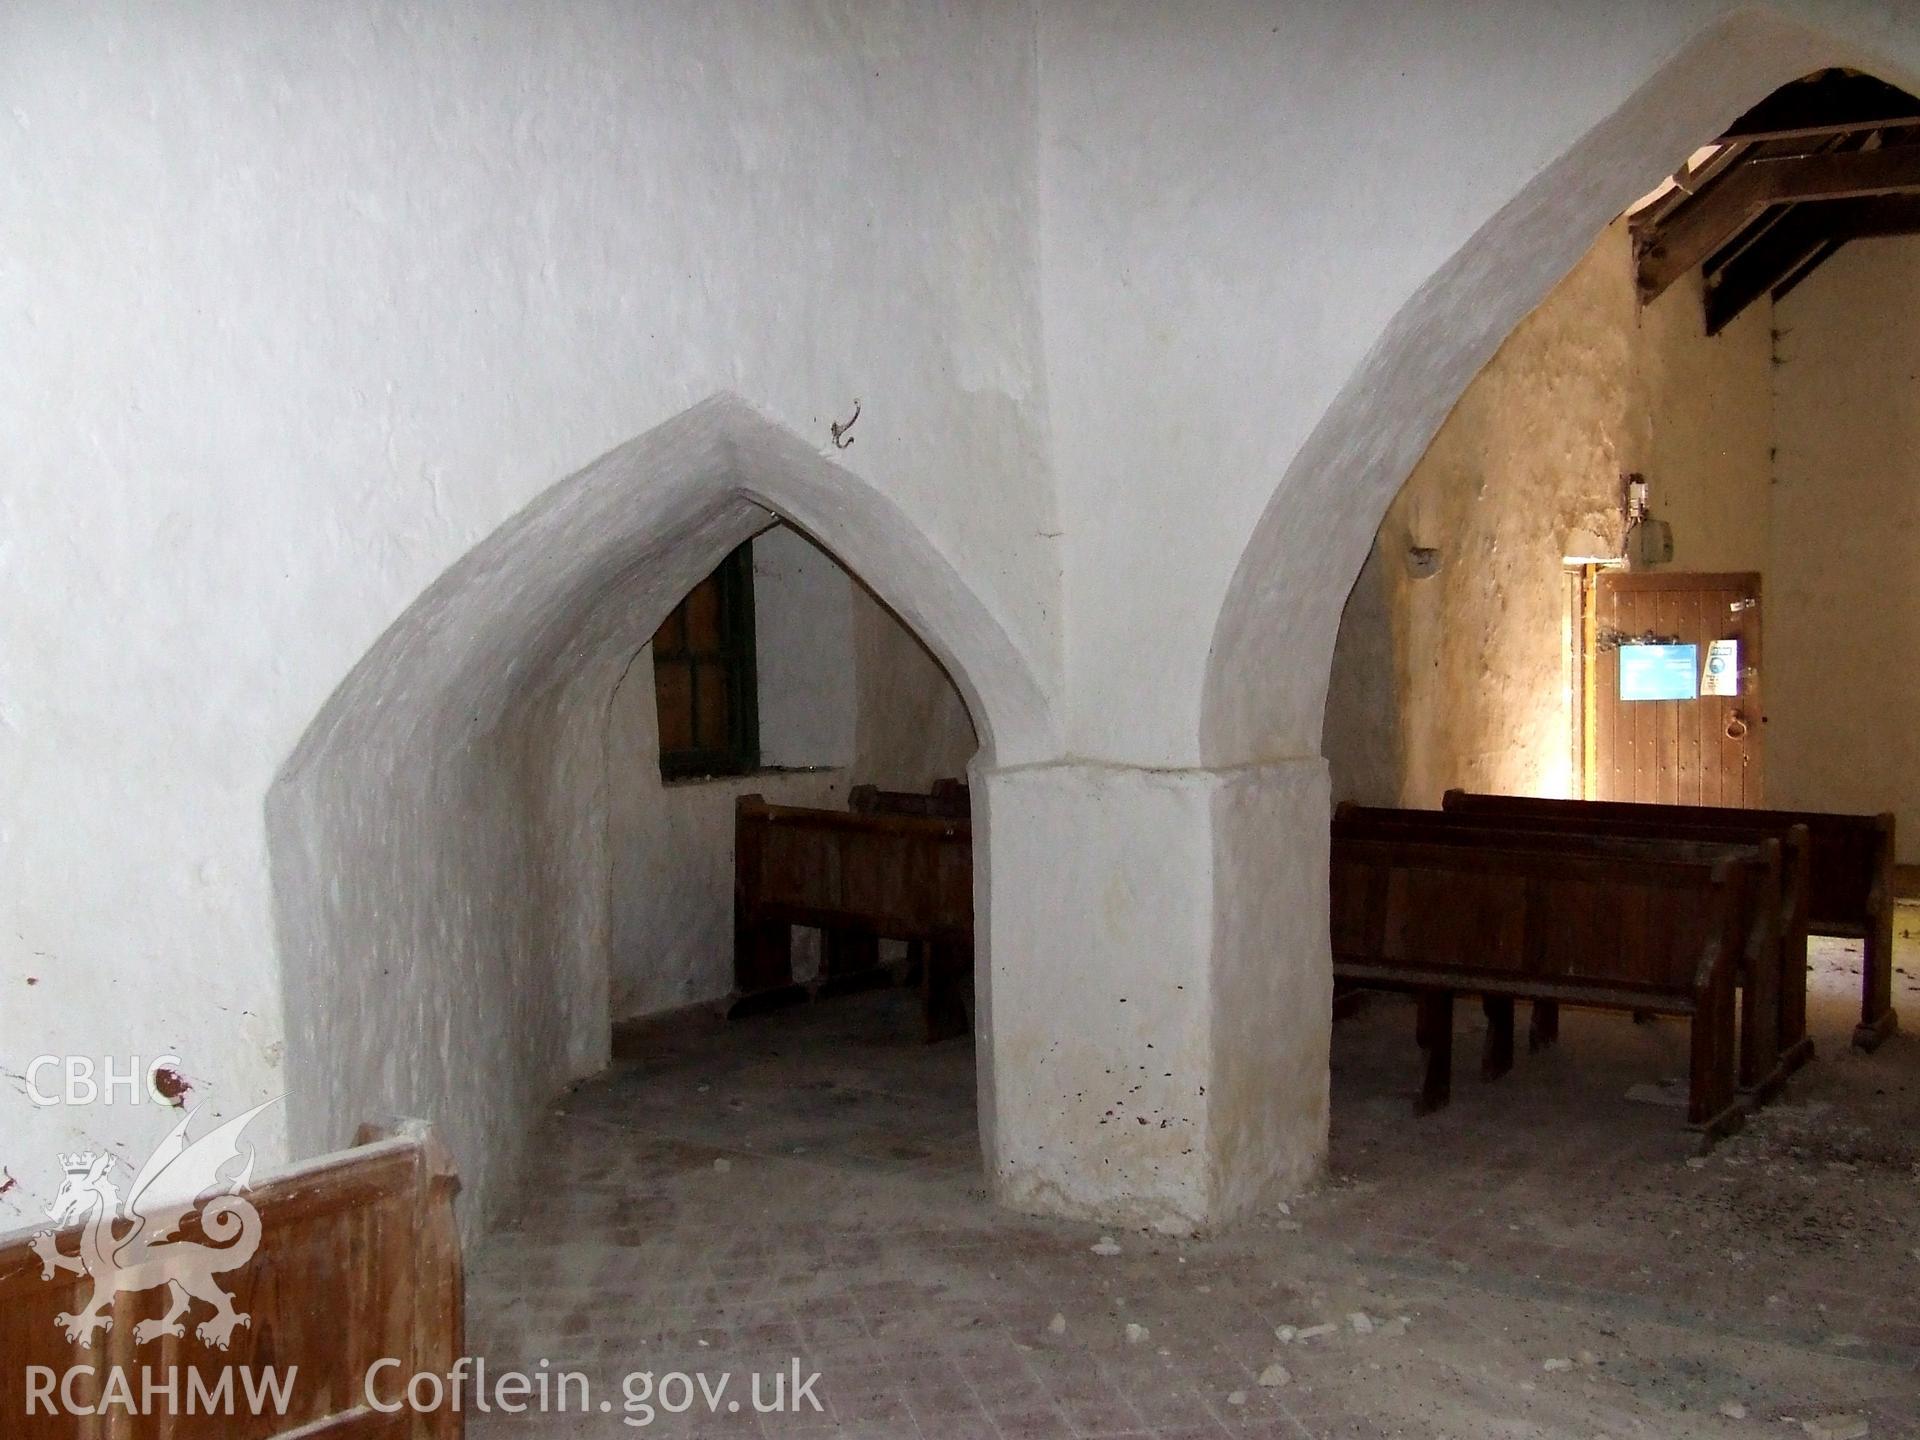 Digital colour photograph showing the skew passage from chancel at St Justinian's Church, Llanstinian. Produced by Martin Davies in 2022.